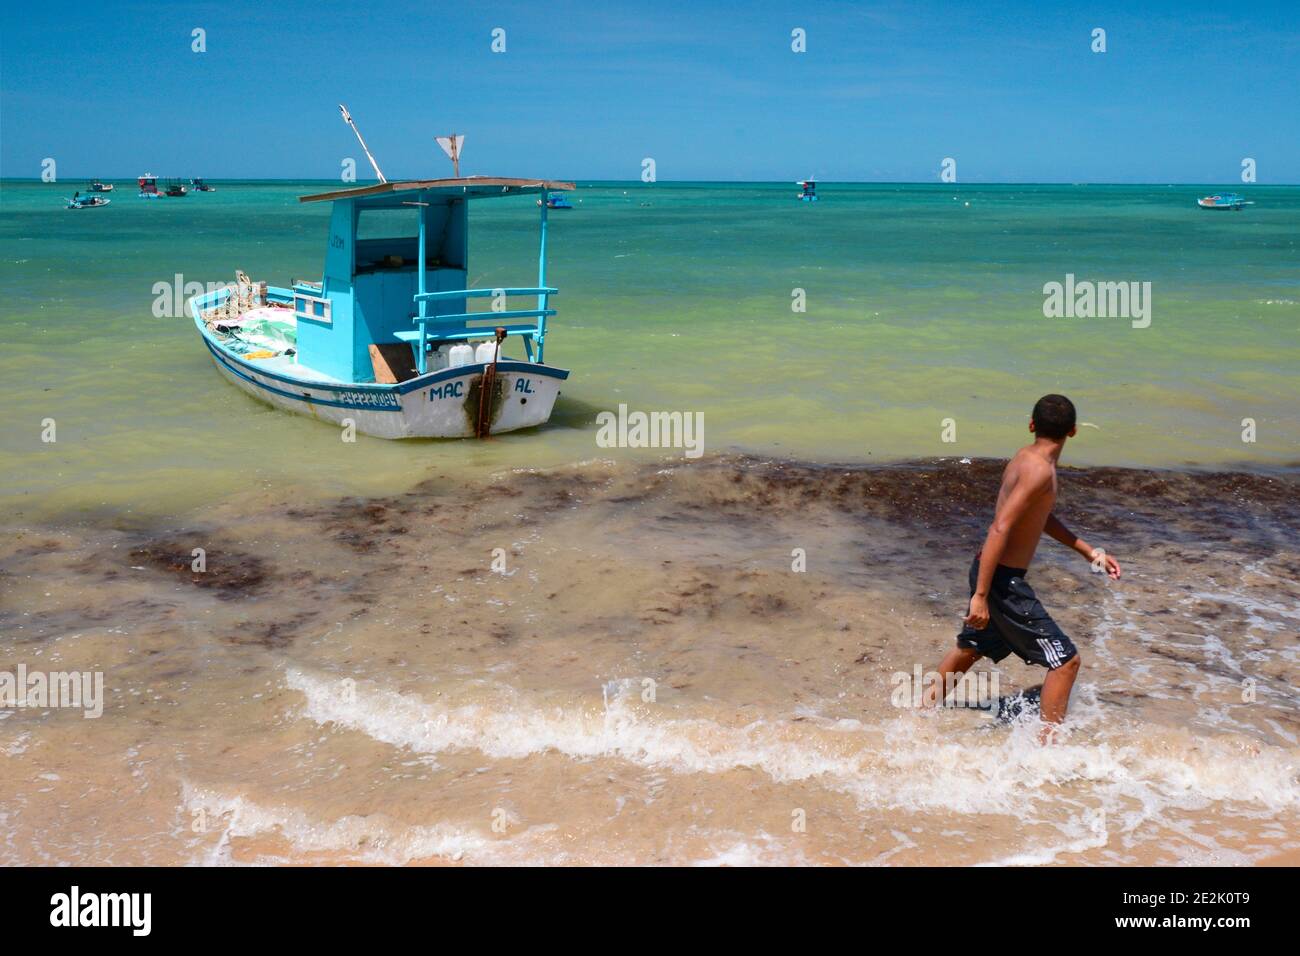 Small fishing boat in the clear waters of Maceió, Brazil Stock Photo